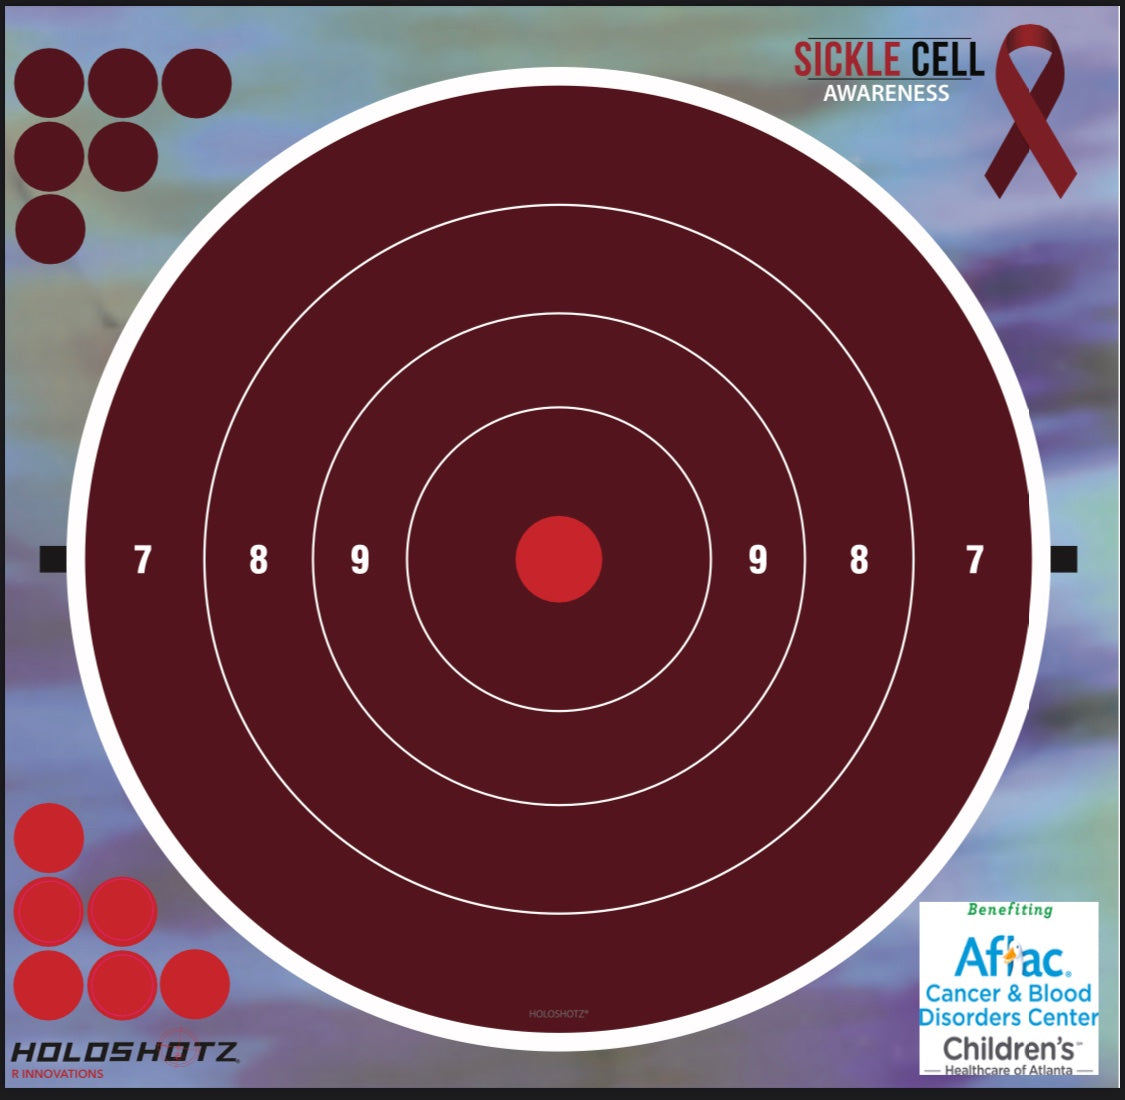 NEW Sickle Cell Awareness Bullseye12" x 12" Reflective Halo Target, 4 Sheets Per Pack